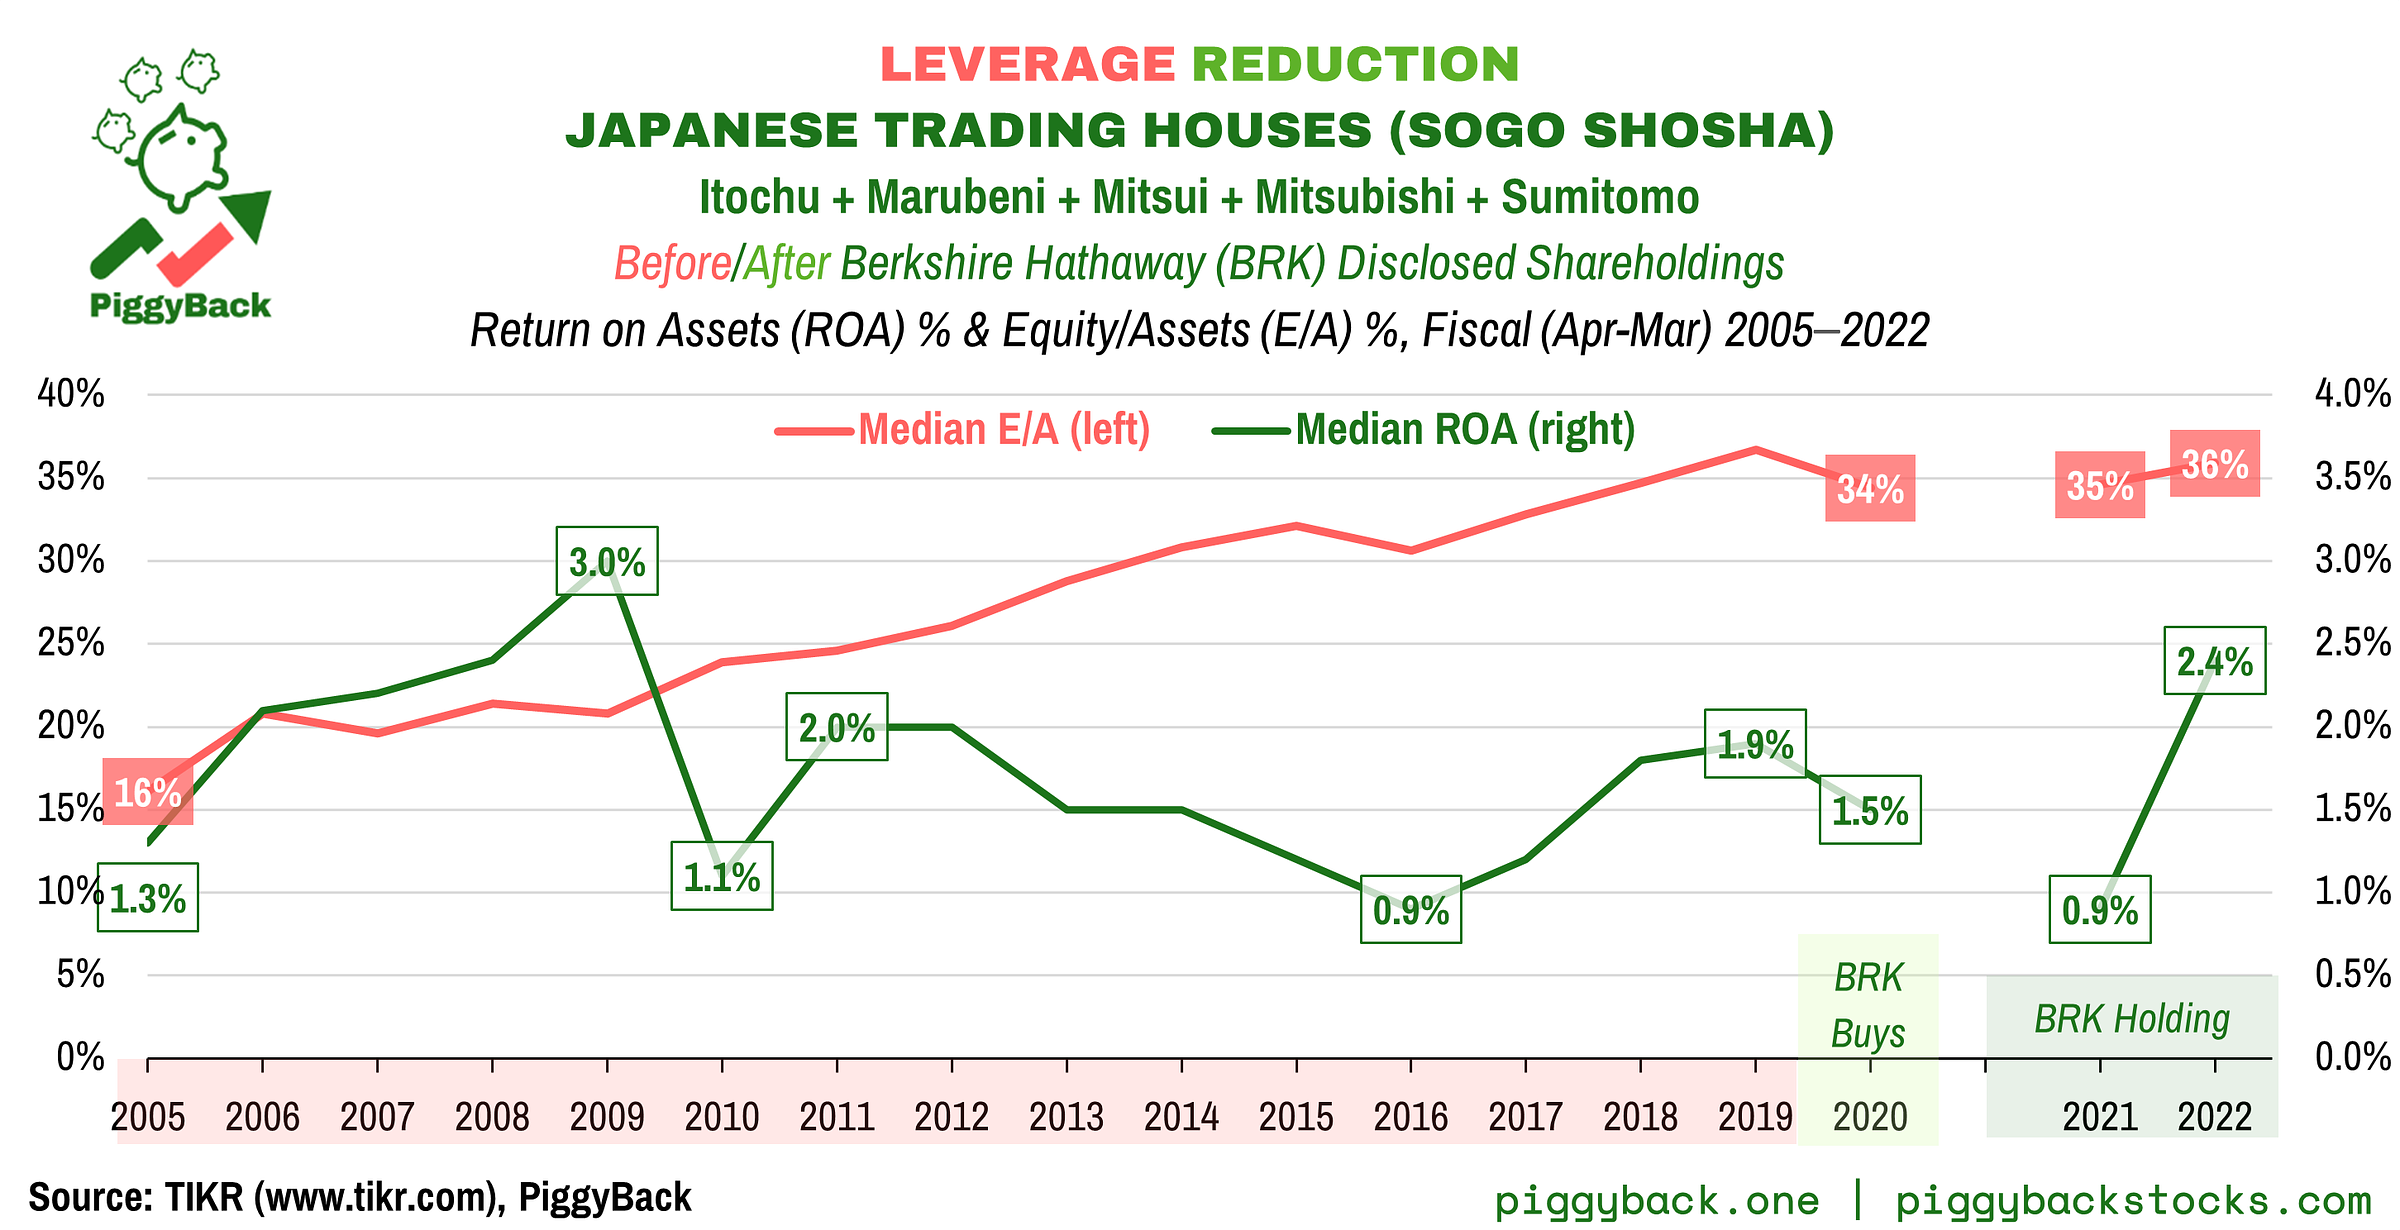 Chart 4: Return on Assets (ROA in dark green on right) versus Equity/Assets ratio (E/A in red on left) for 5 Japanese trading house stocks for the fiscal reporting years 2005-2020 (April-March), right before Berkshire Hathaway disclosed holdings in all five stocks on August 31, 2020. The chart shows how the trading houses deleveraged, in terms of increasing their Equity to Assets, for more than a decade before Berkshire invested. At the same time their Return on Assets rose and fell with the commodity cycle. After Berkshire's investment the ROA has picked up again. Source: TIKR, Analysis: PiggyBack